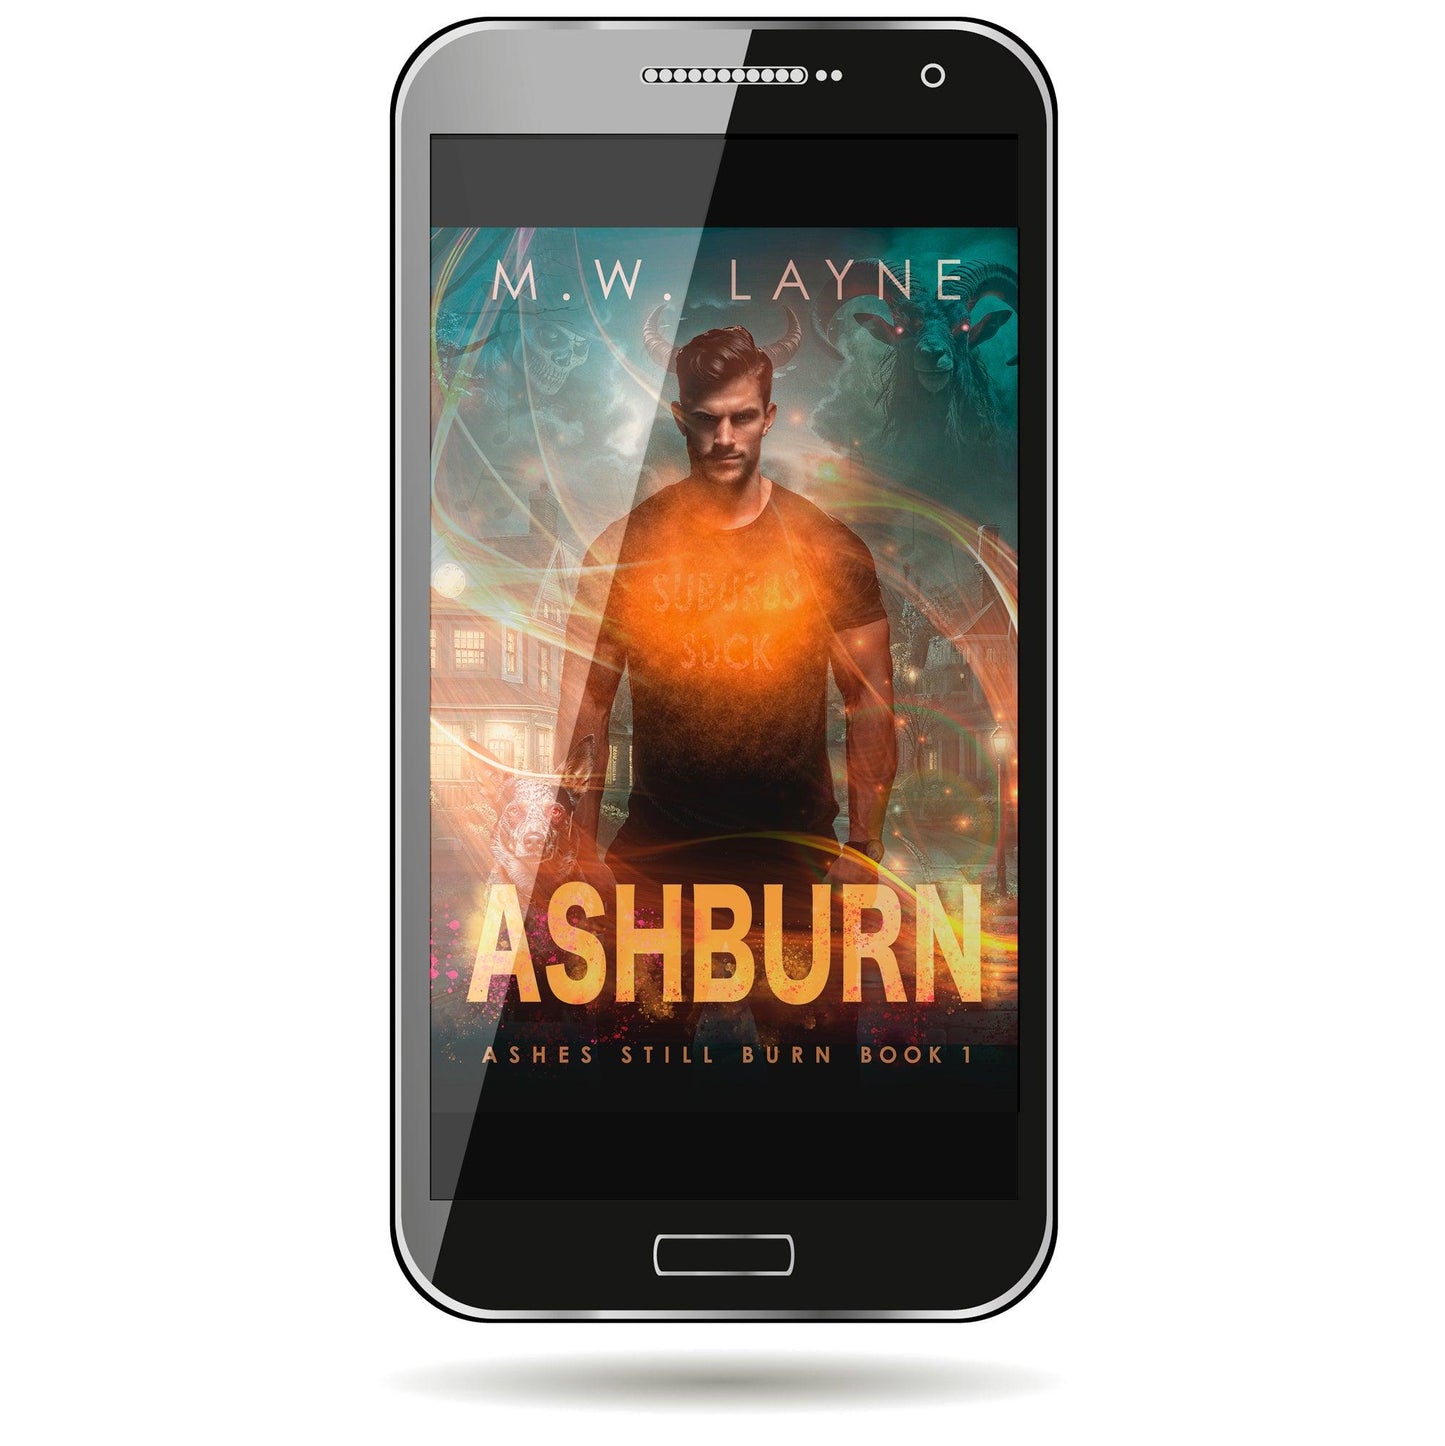 Cover for Ashburn ebook shown on mobile phone